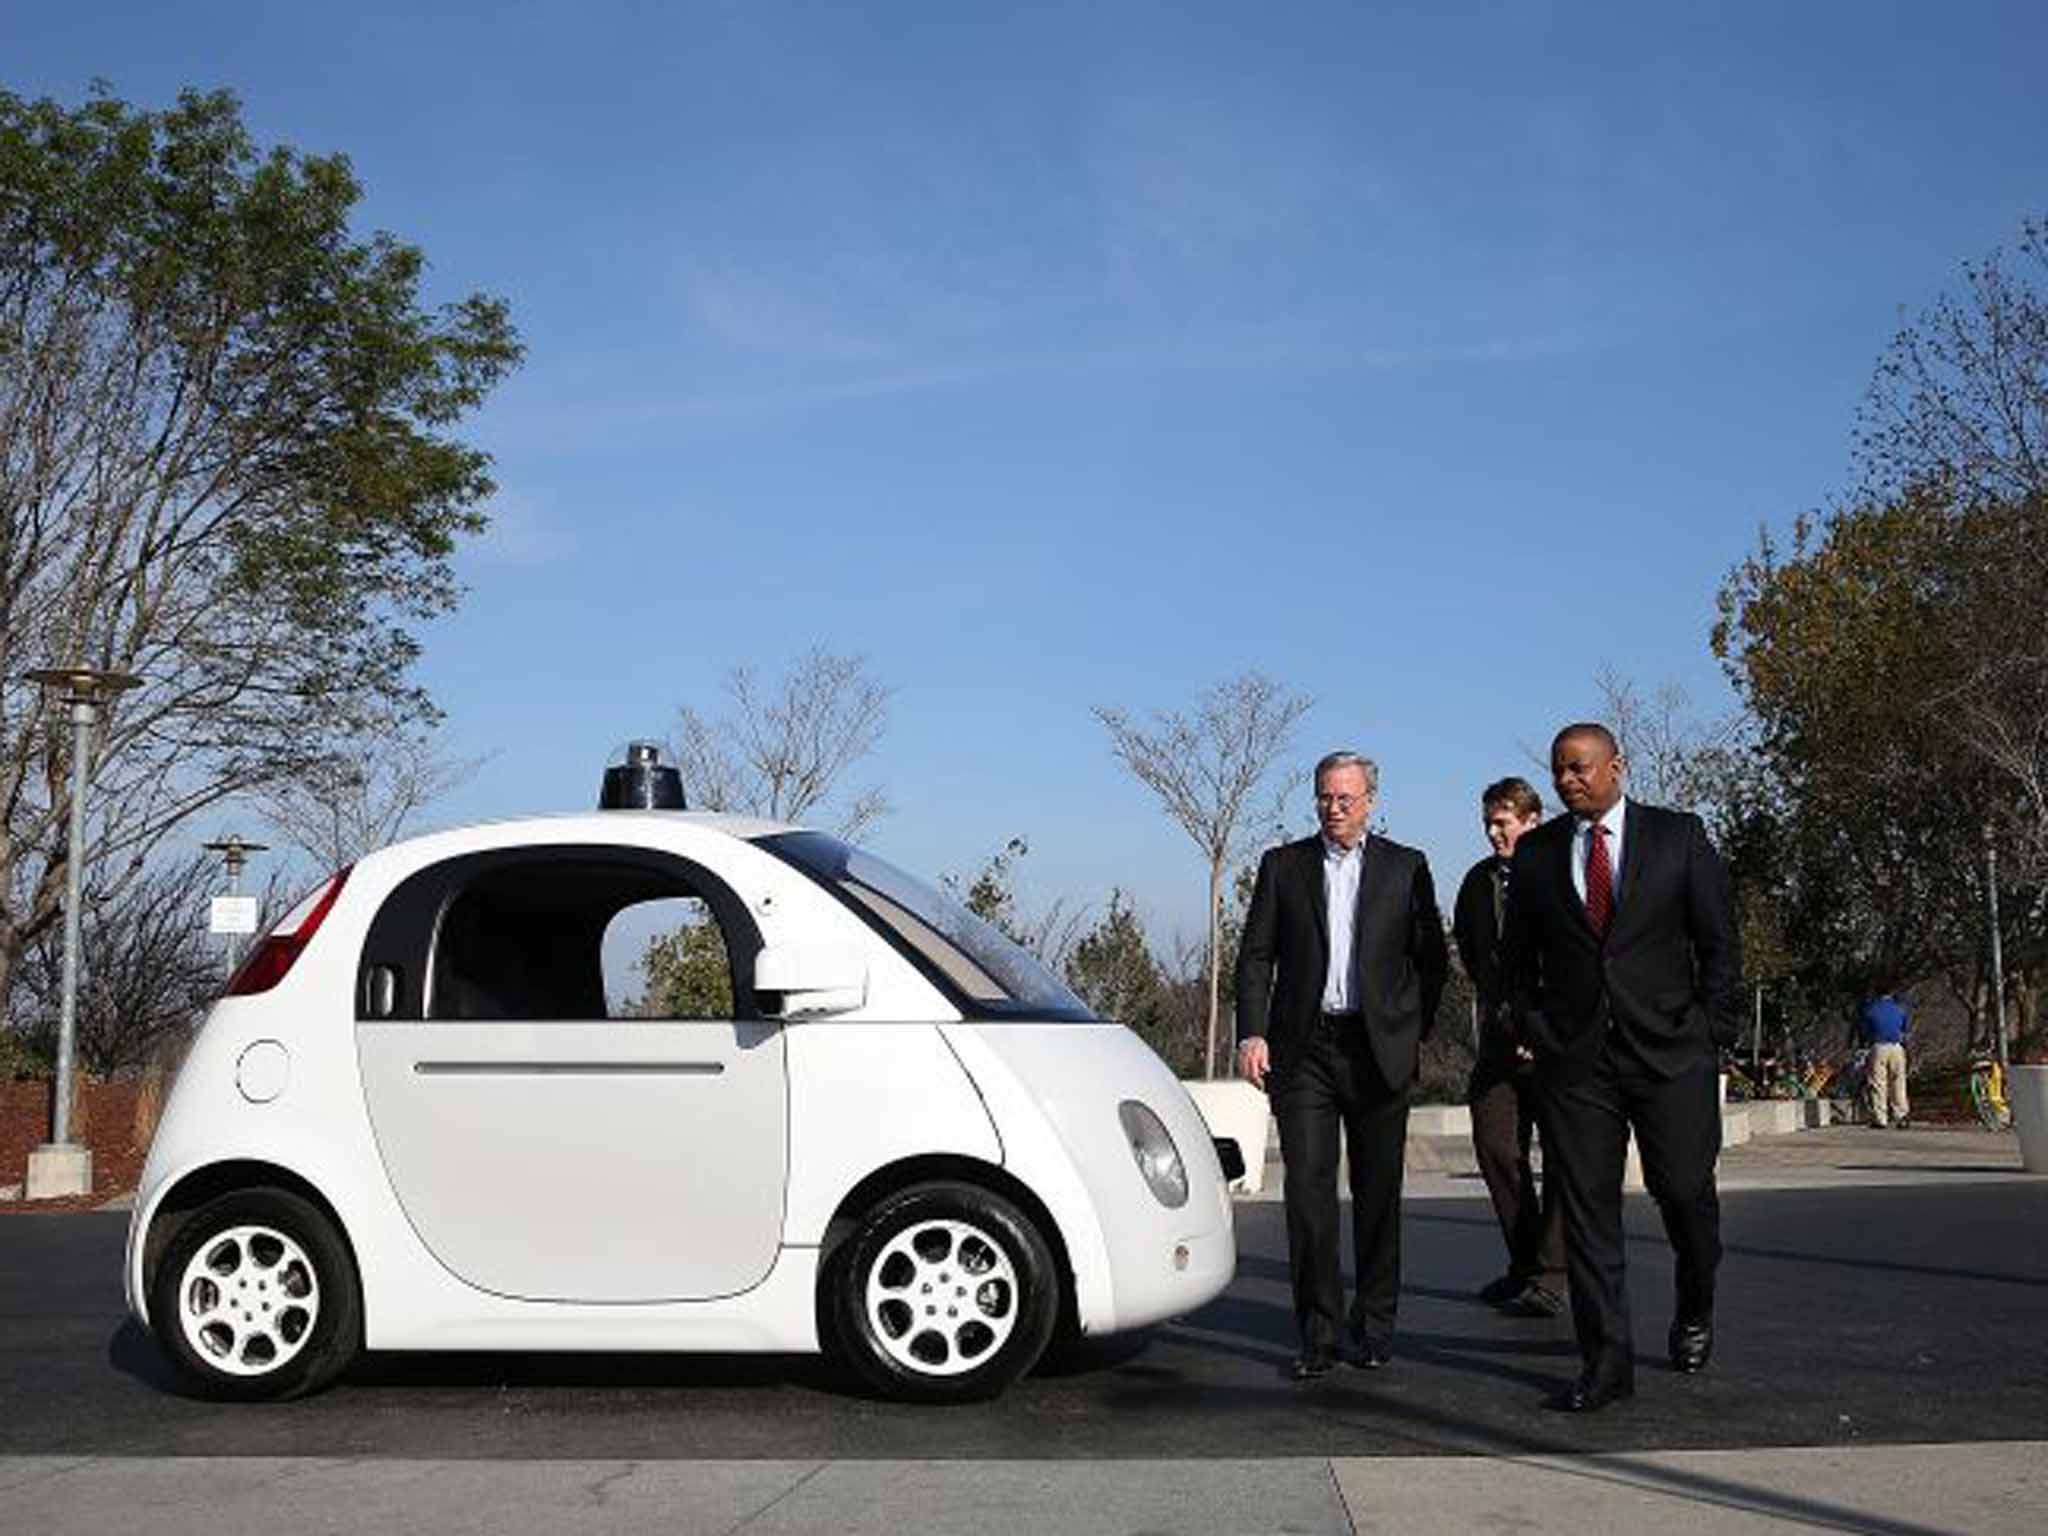 The Googlemobile has a moon face that could drive you to road rage